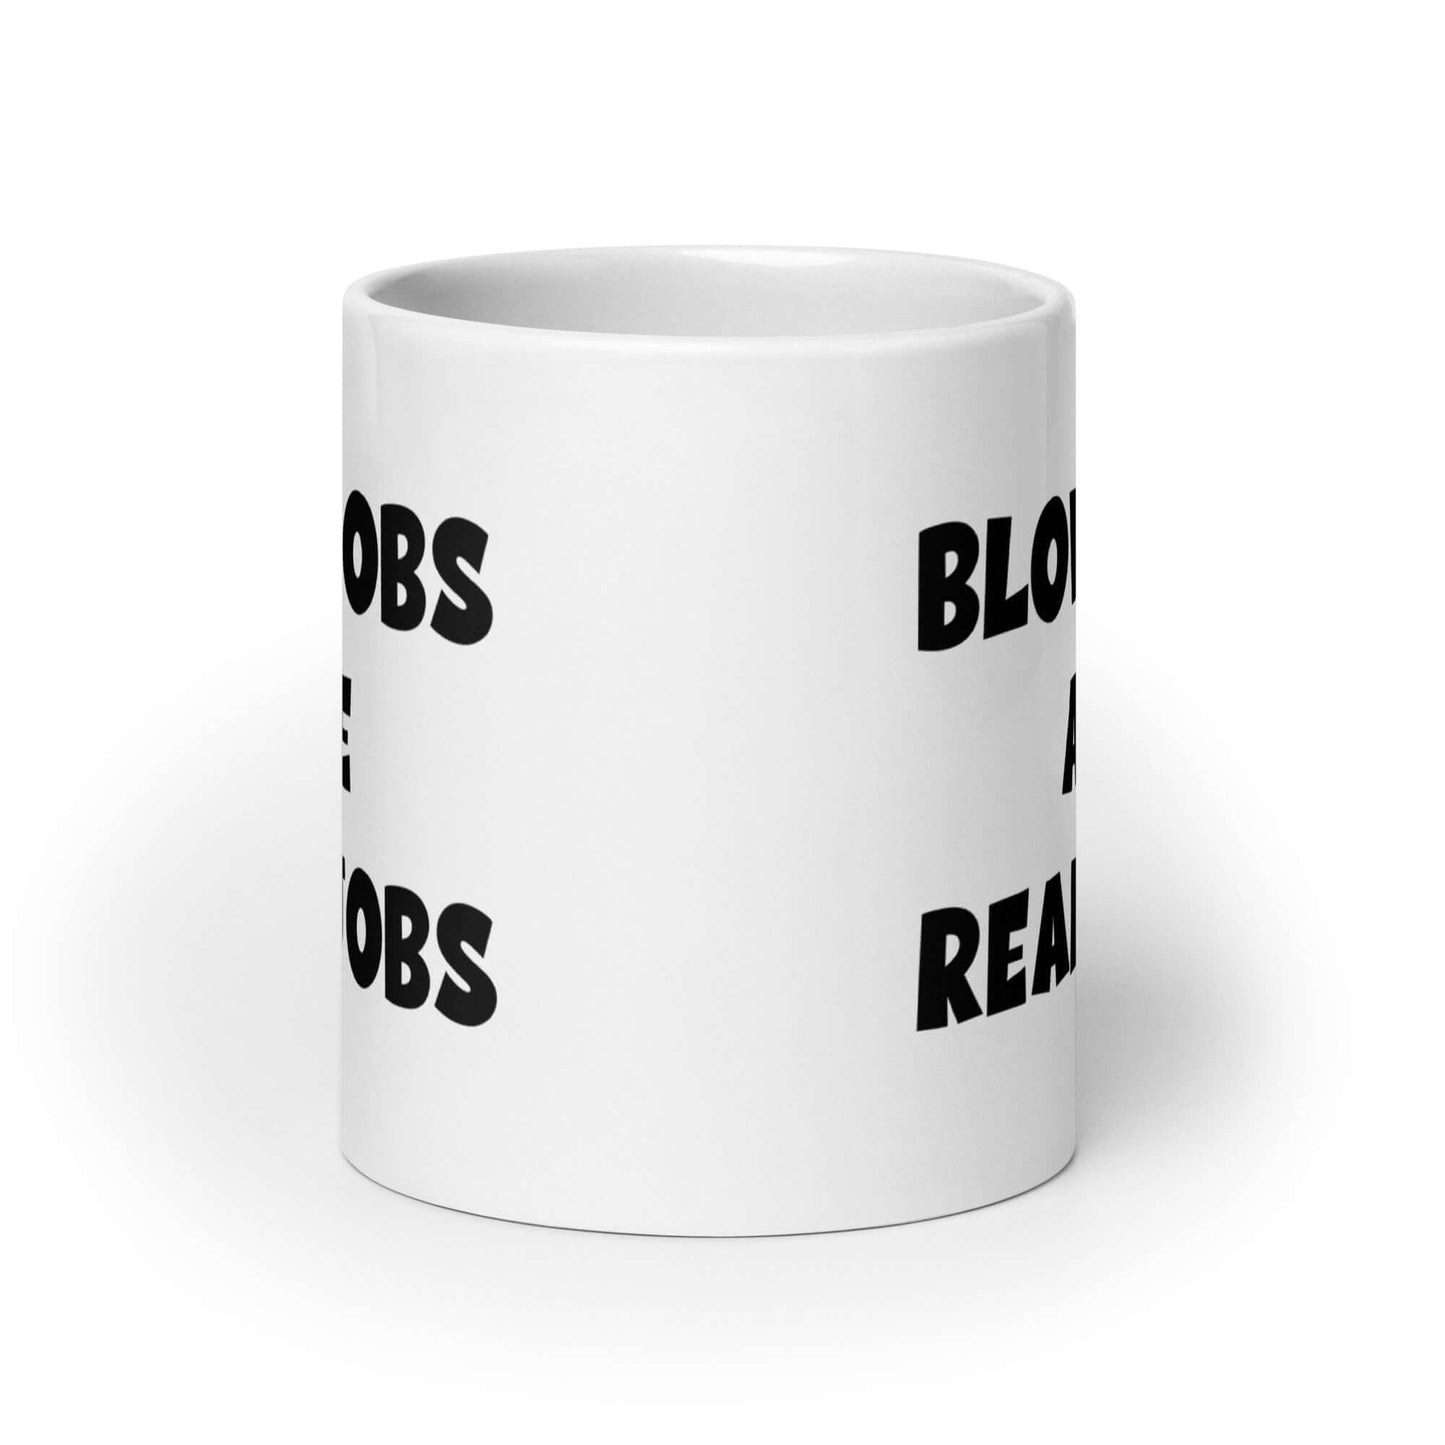 Blowjobs are real jobs funny inappropriate sexual humor ceramic mug